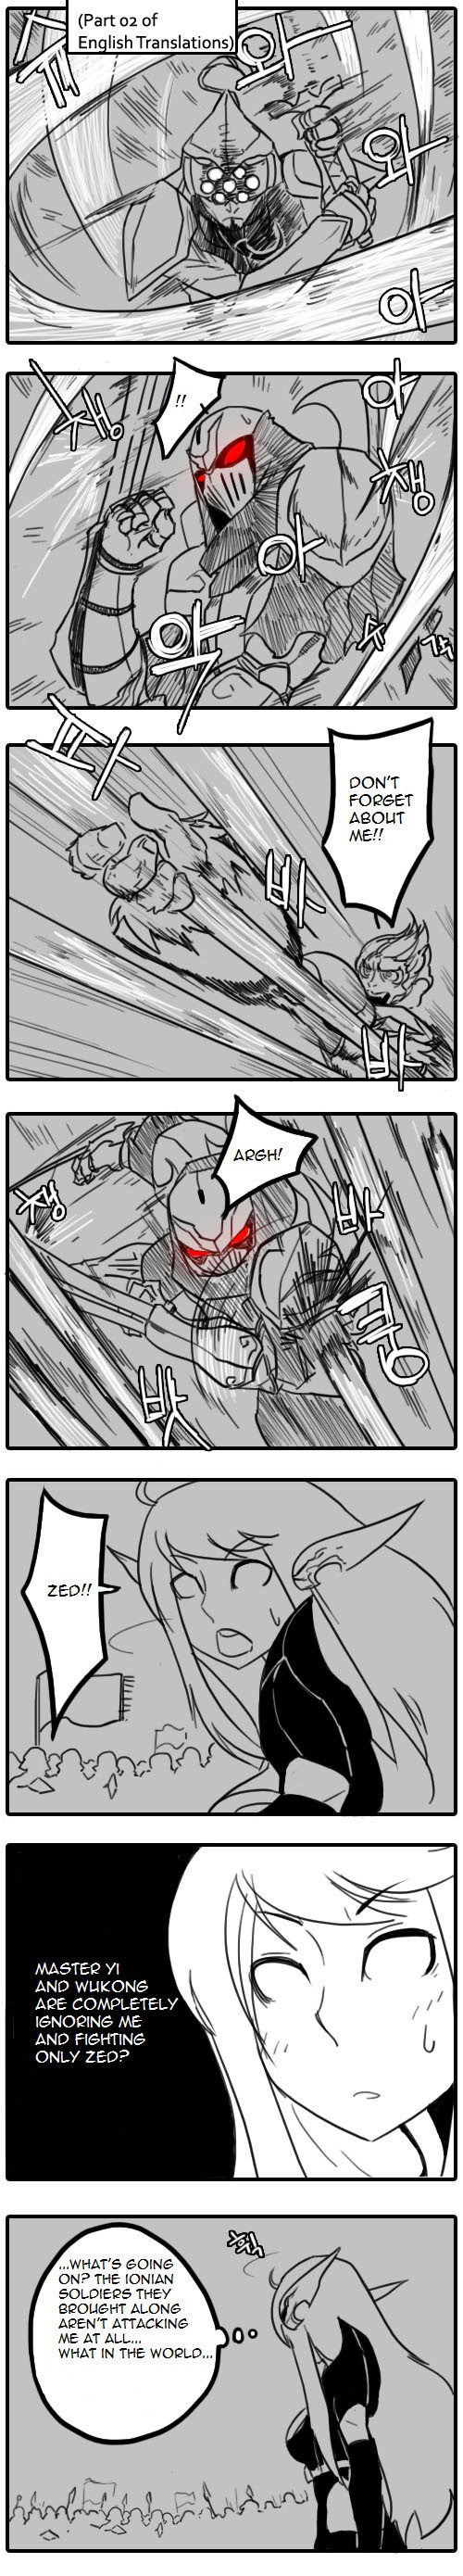 League of Legends Syndra & Zed's Everyday Life (Doujinshi) Vol. 1 Ch. 11